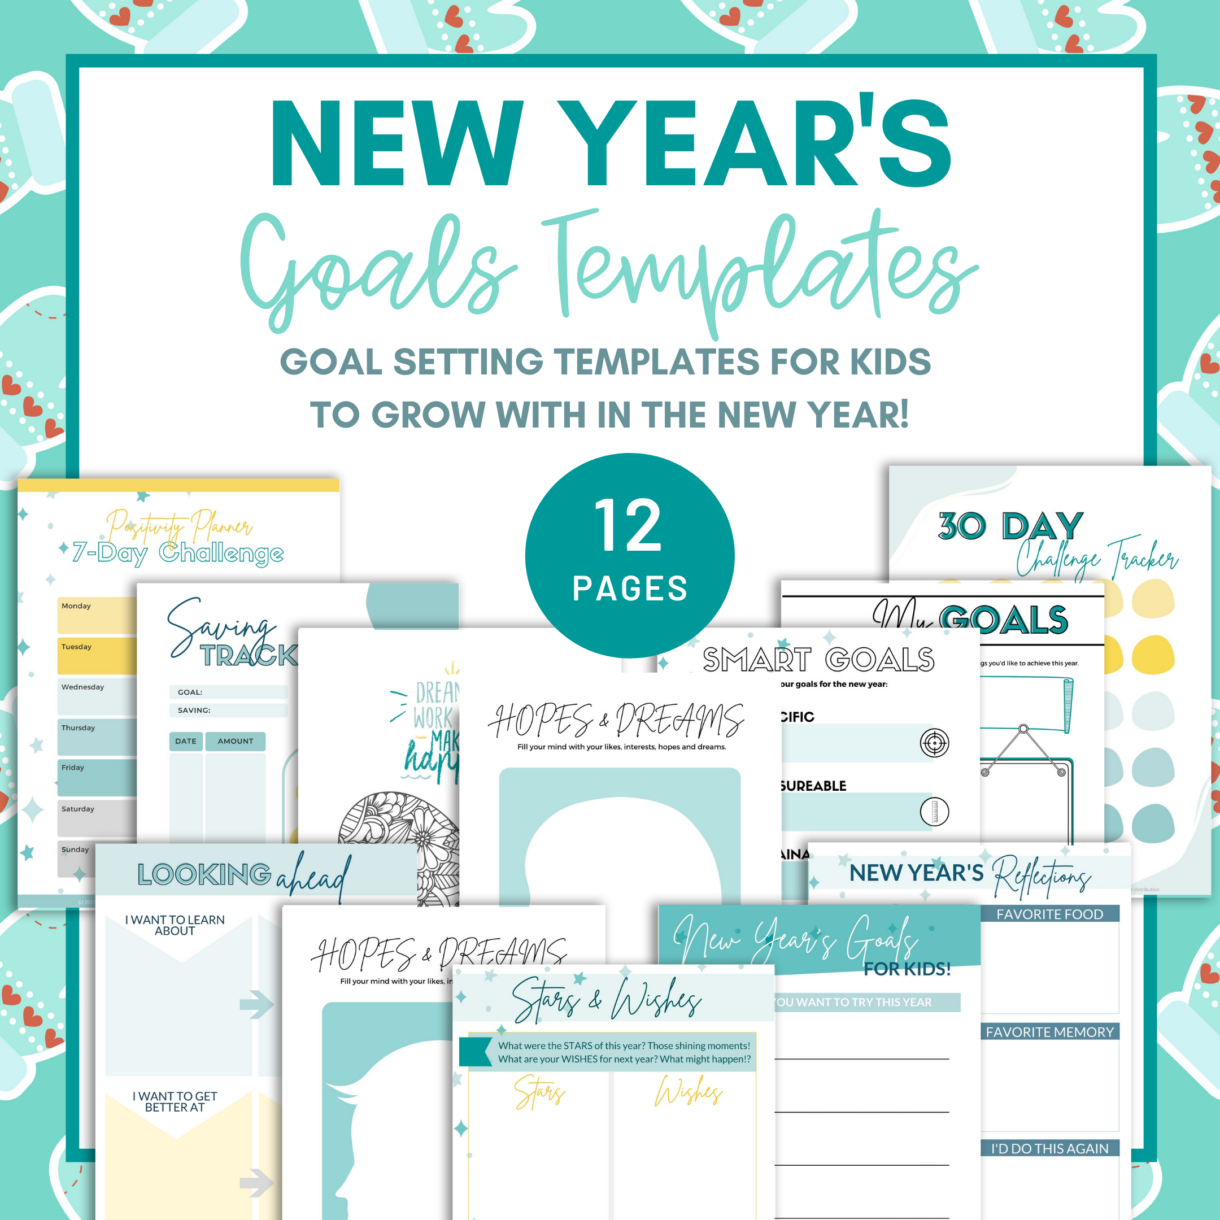 New Years Goals Templates Etsy Square - Pelavida - Shop For Life